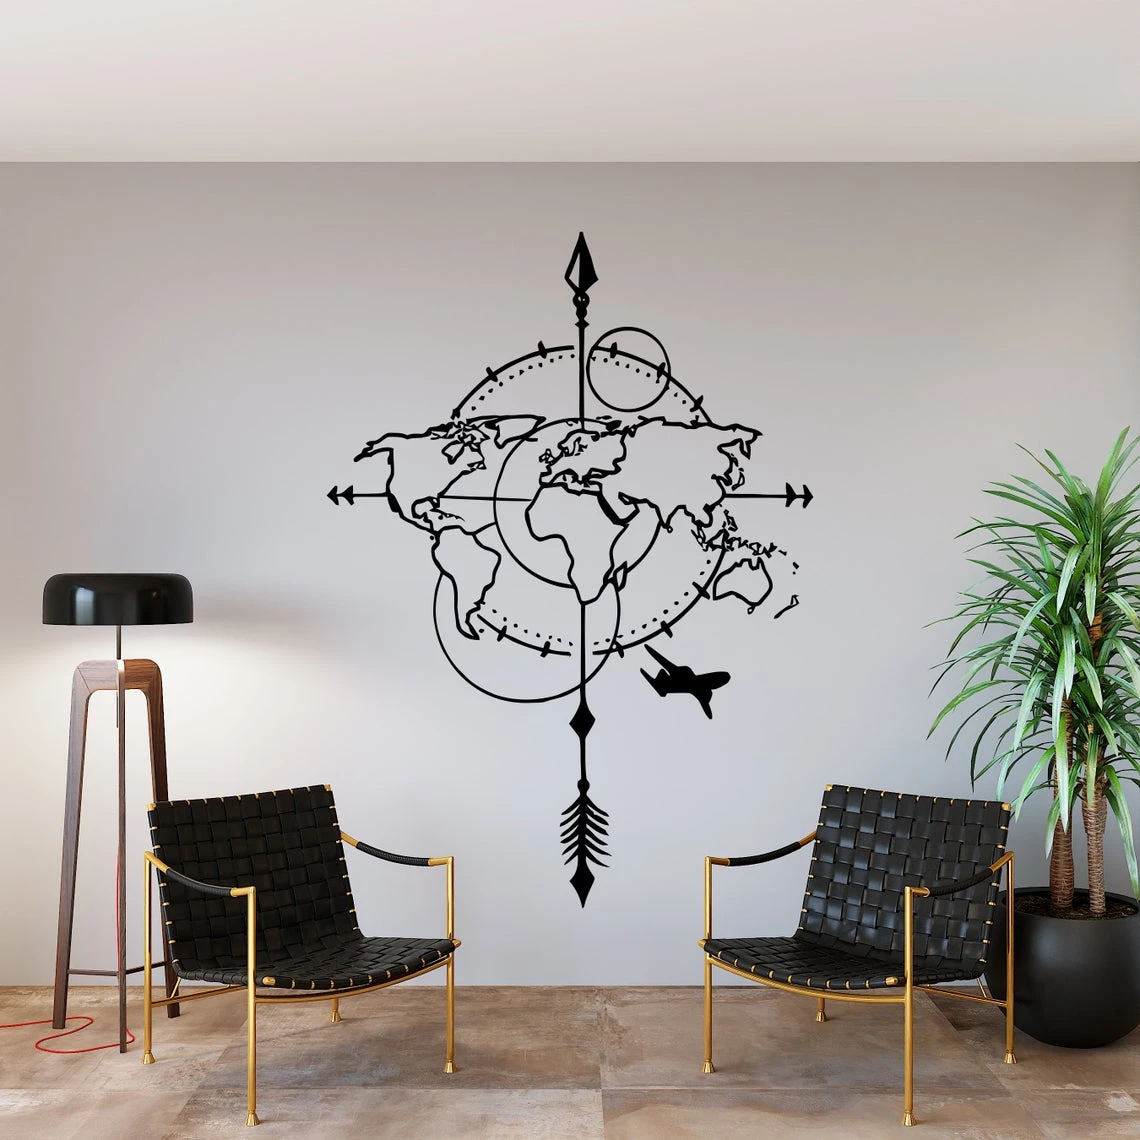 Large World Map Decal Vinyl Wall Stickers for Modern Wall design for Home Decor